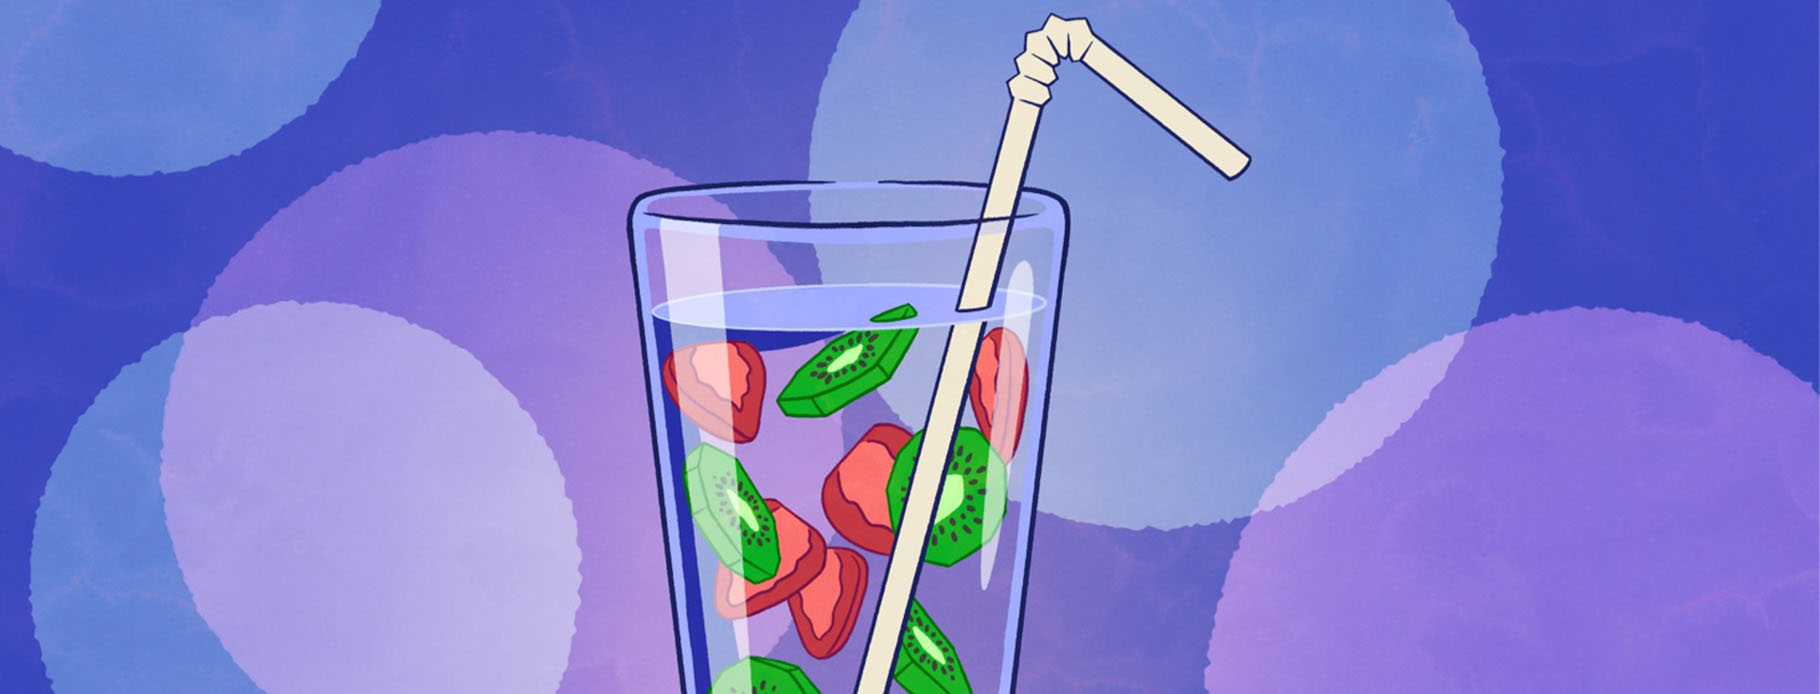 A glass of fruit water with a straw against a purple background